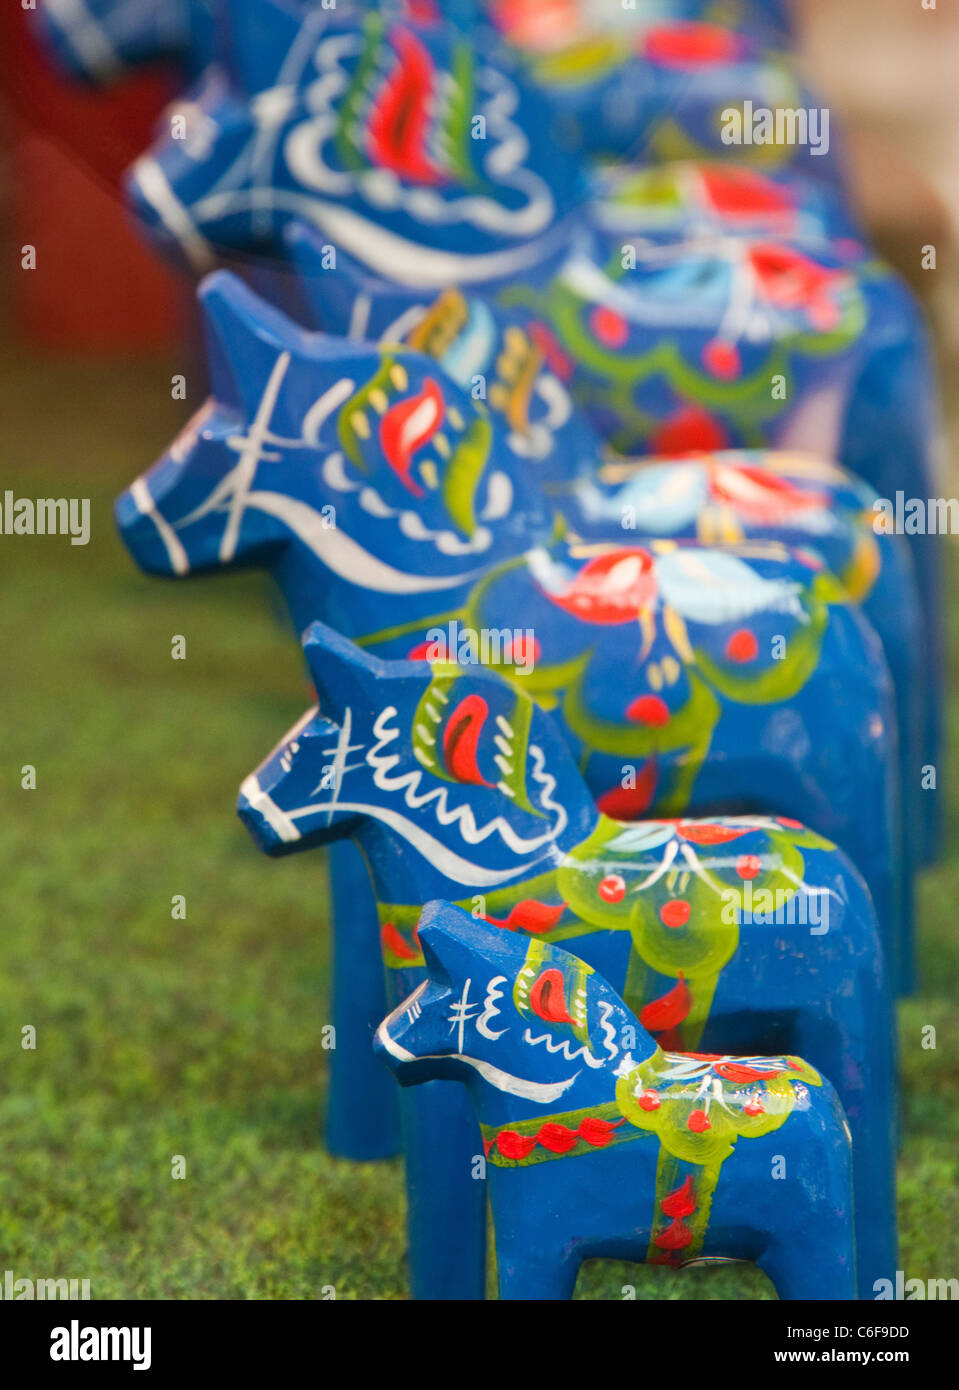 Colorful Dala Horses in a shop window in Stockholm, Sweden Stock Photo